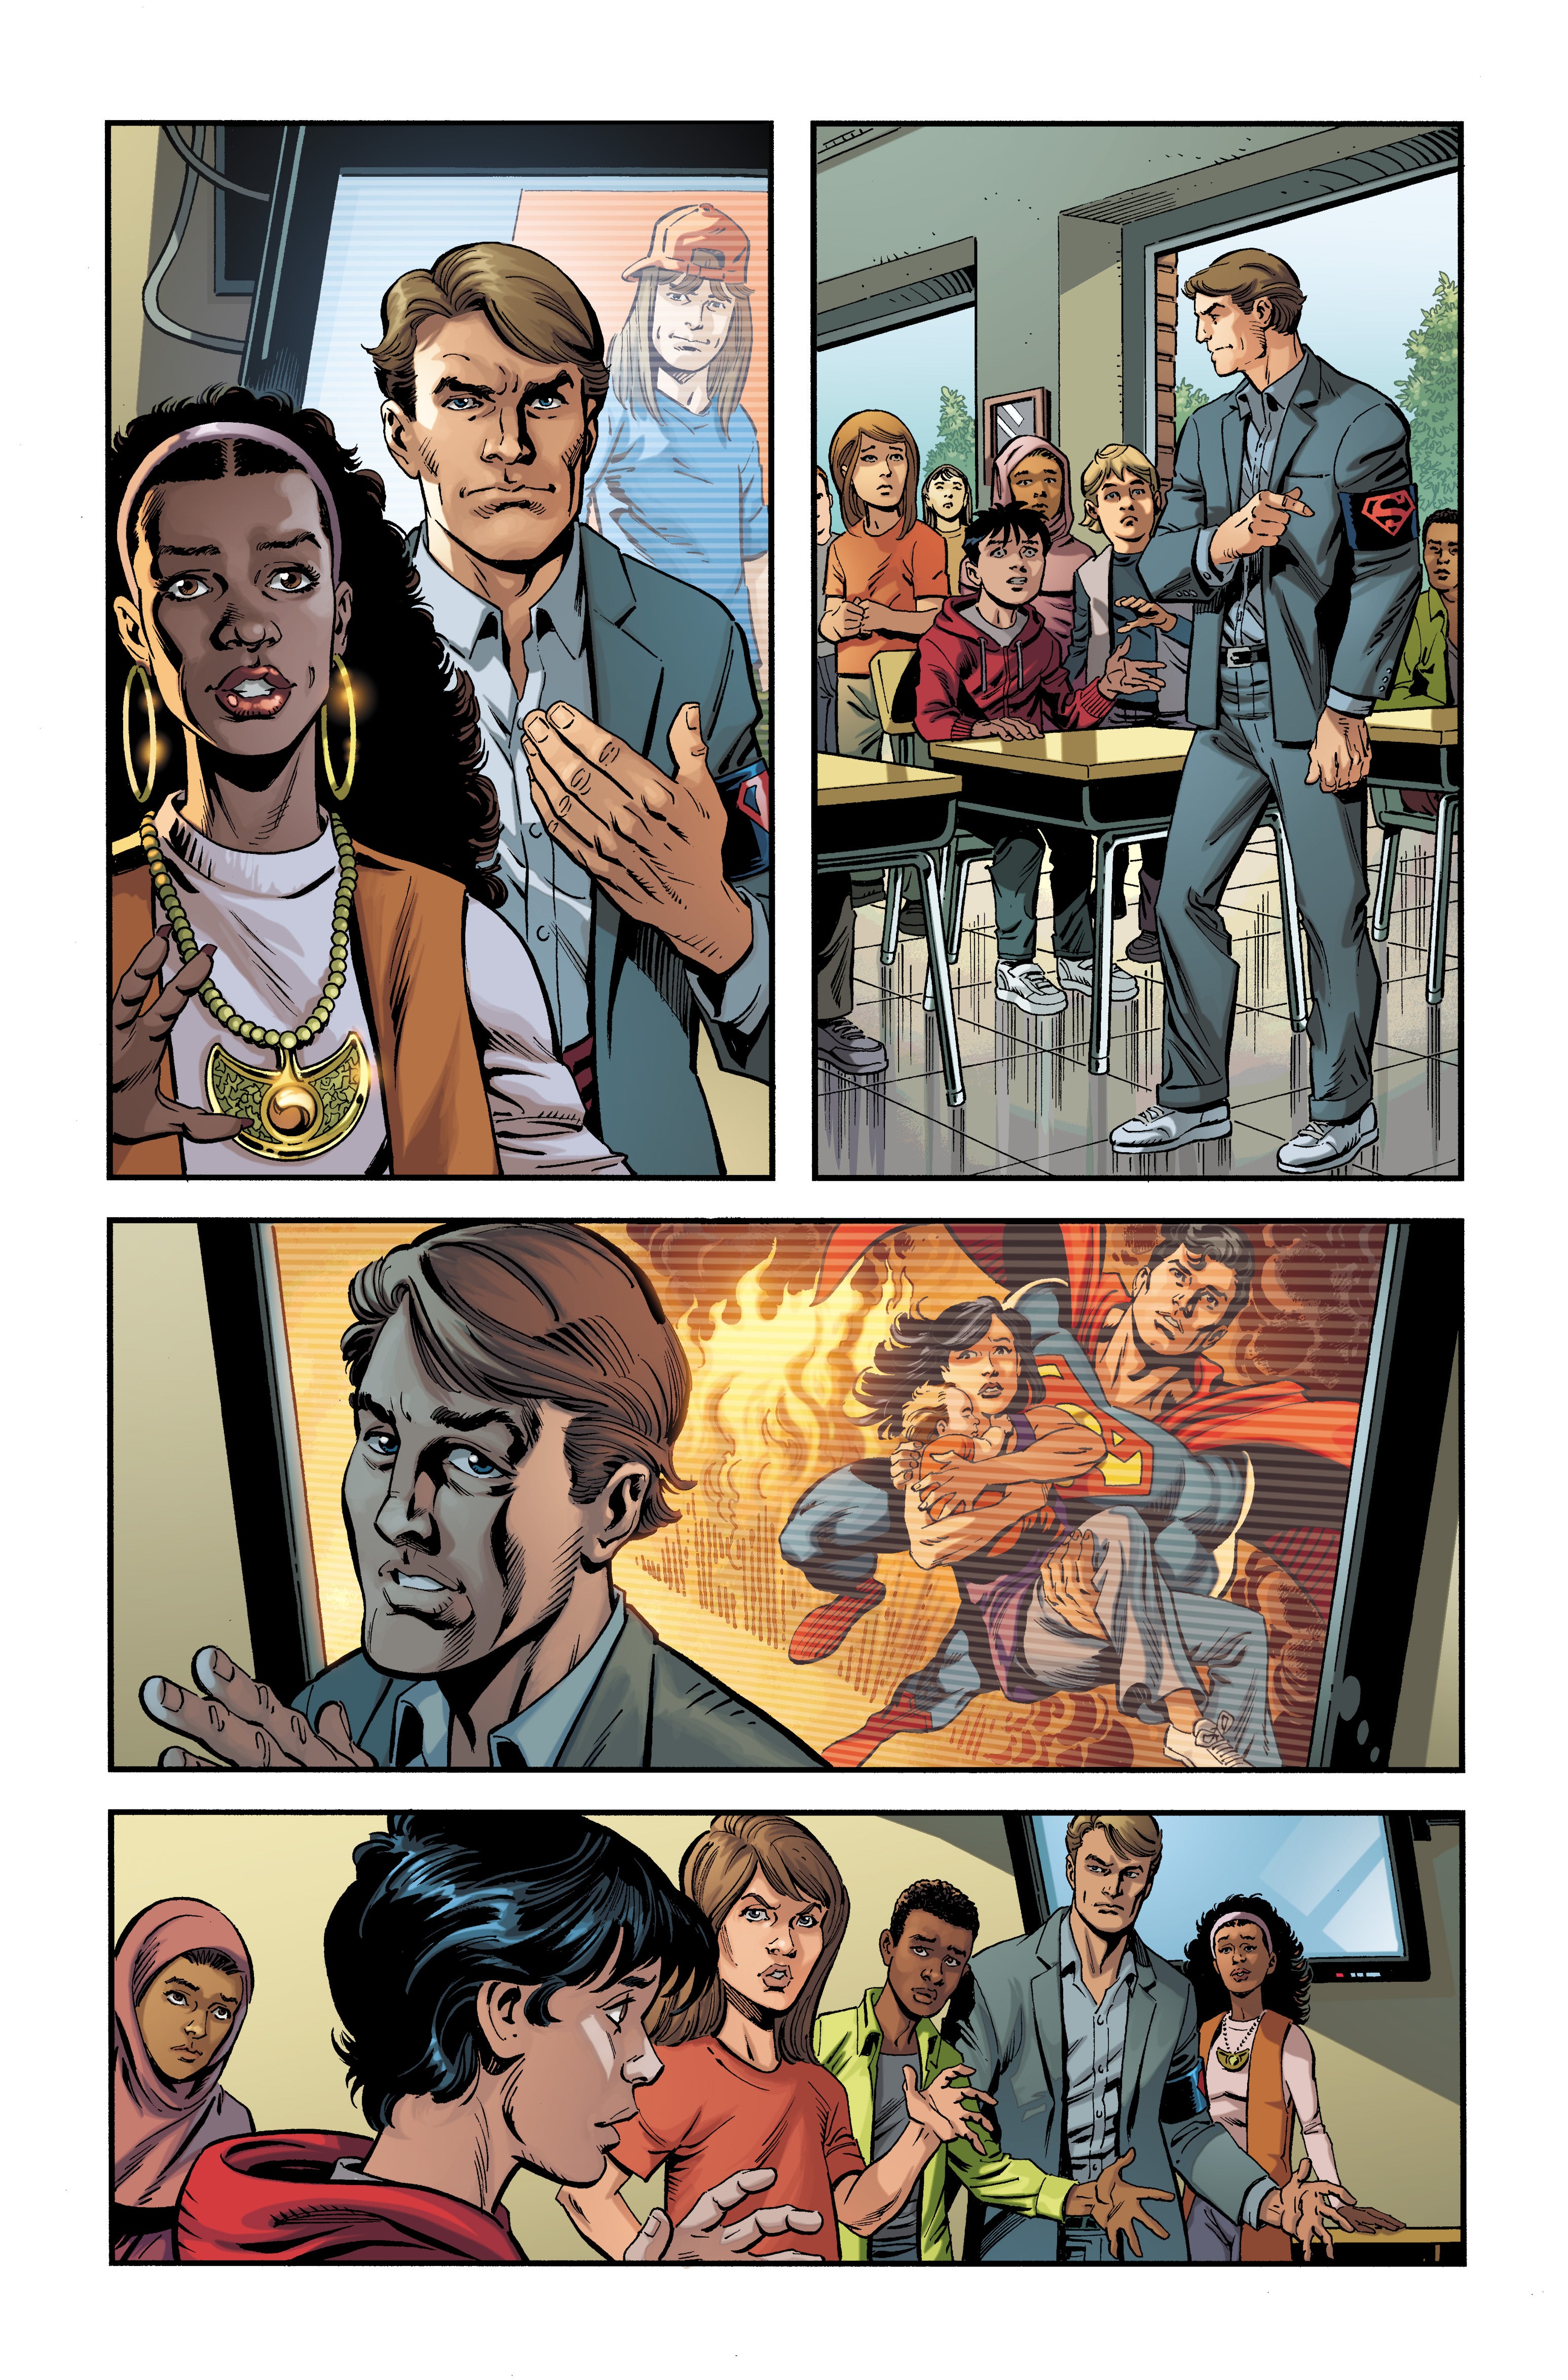 Interior comics art featuring people looking at a screen featuring Superman